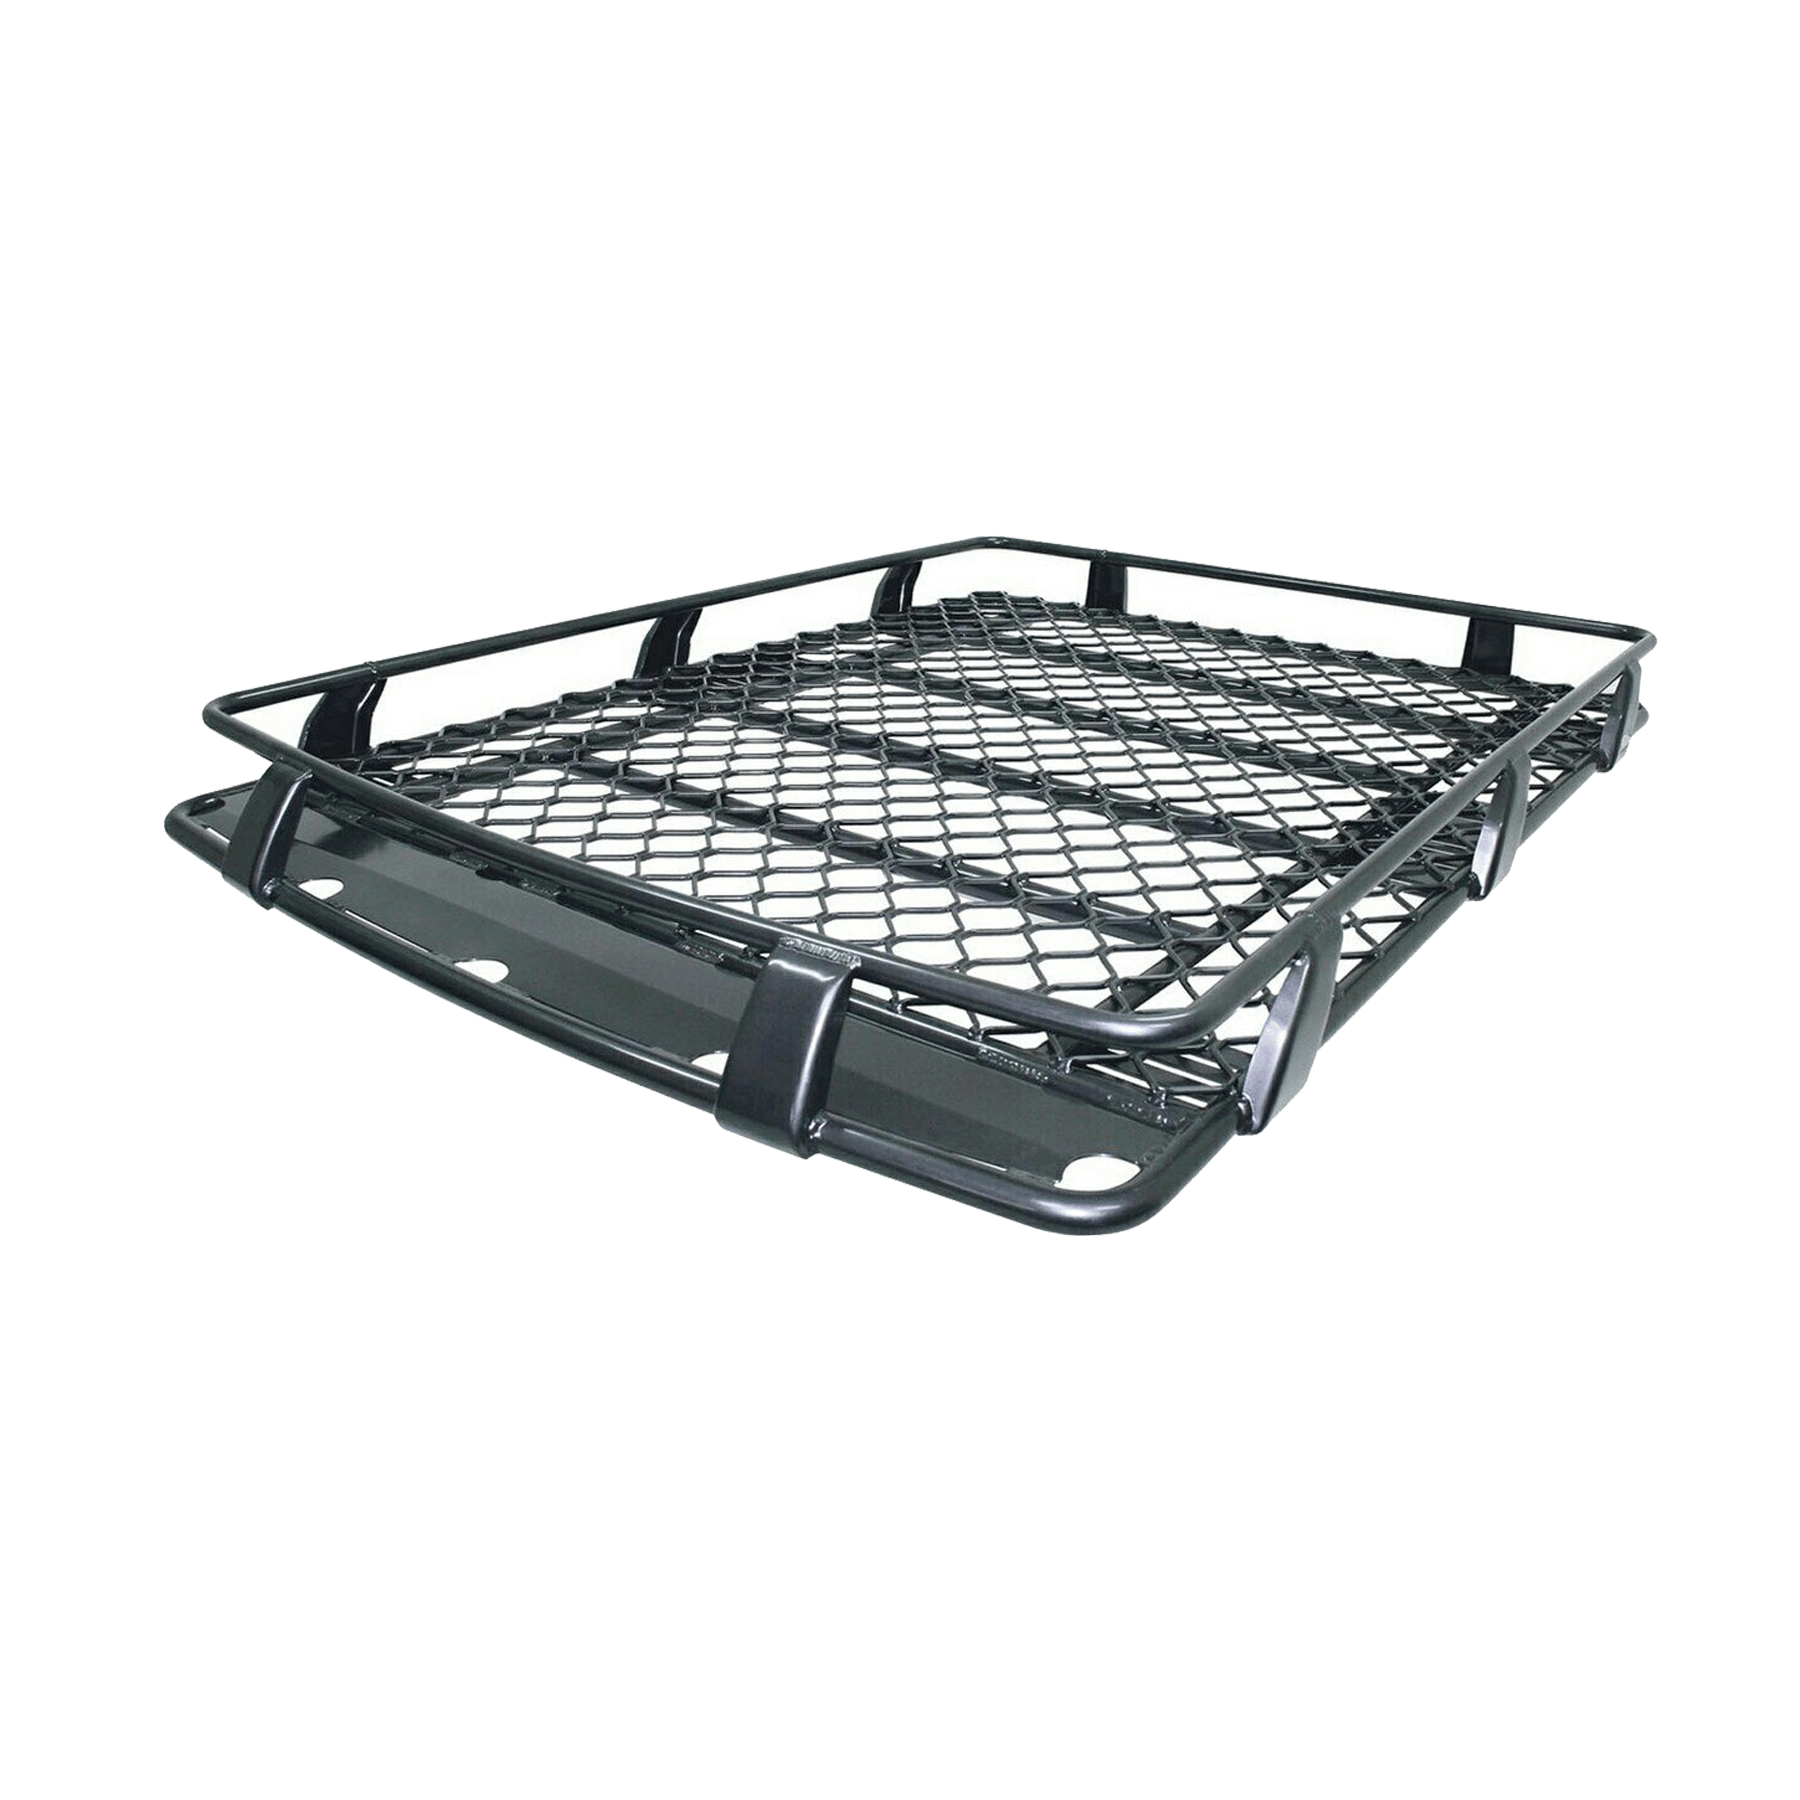 LANDCRUISER 78 SERIES 1999 TO 2007 BASKET ALLOY ROOF RACK – 1.4M X 1.25M (OPEN END)